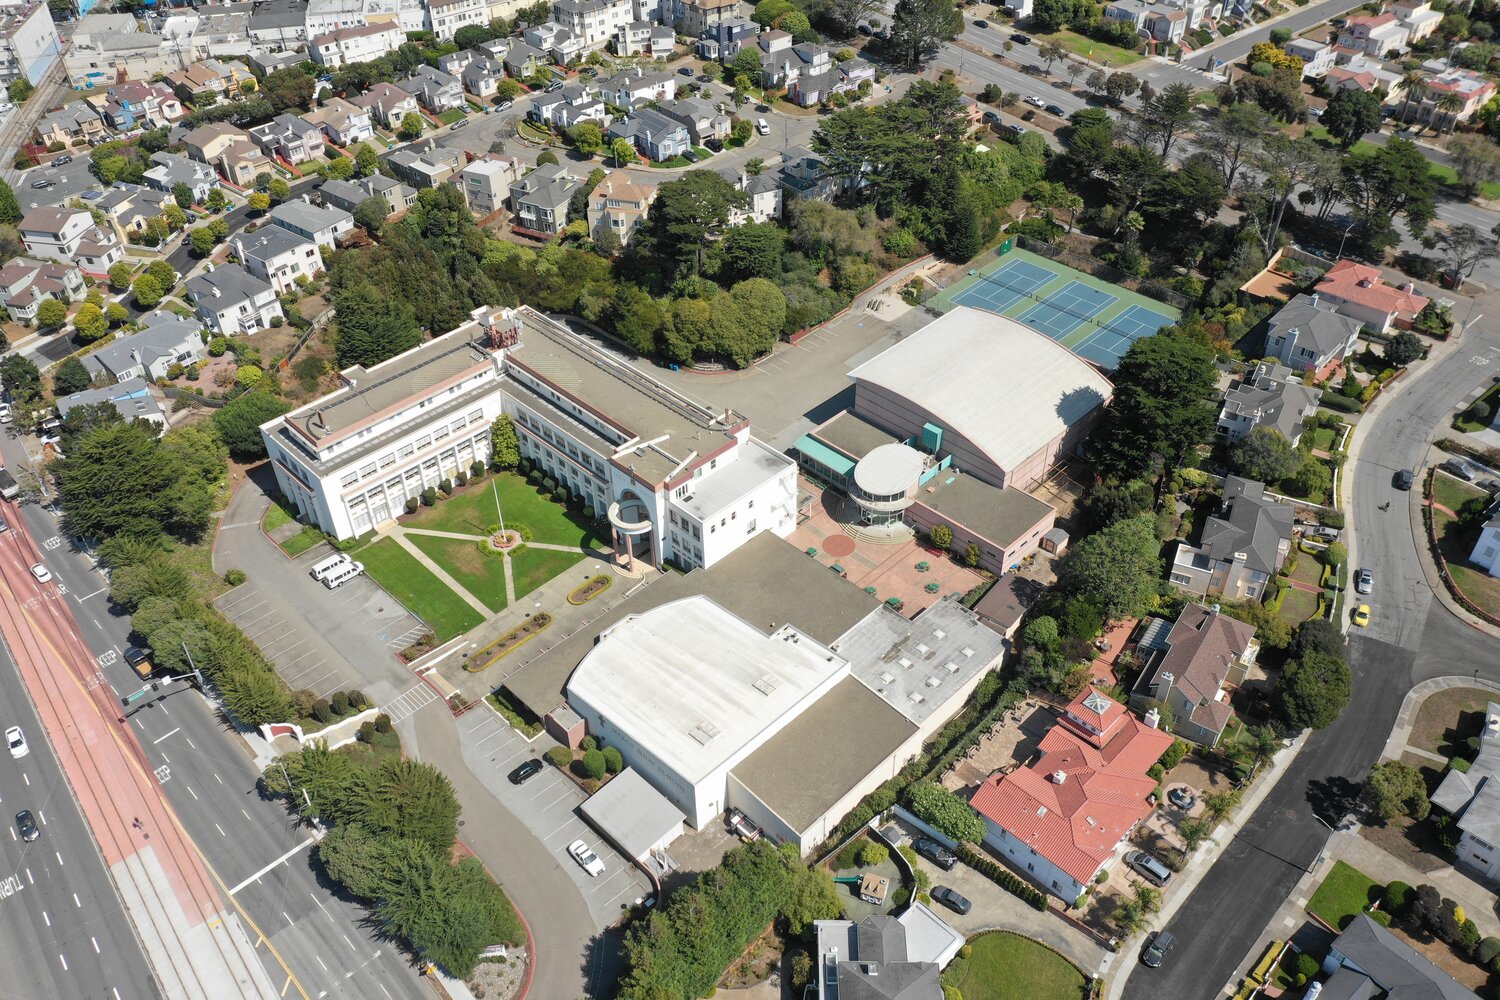 Aerial View of 19th Avenue Campus